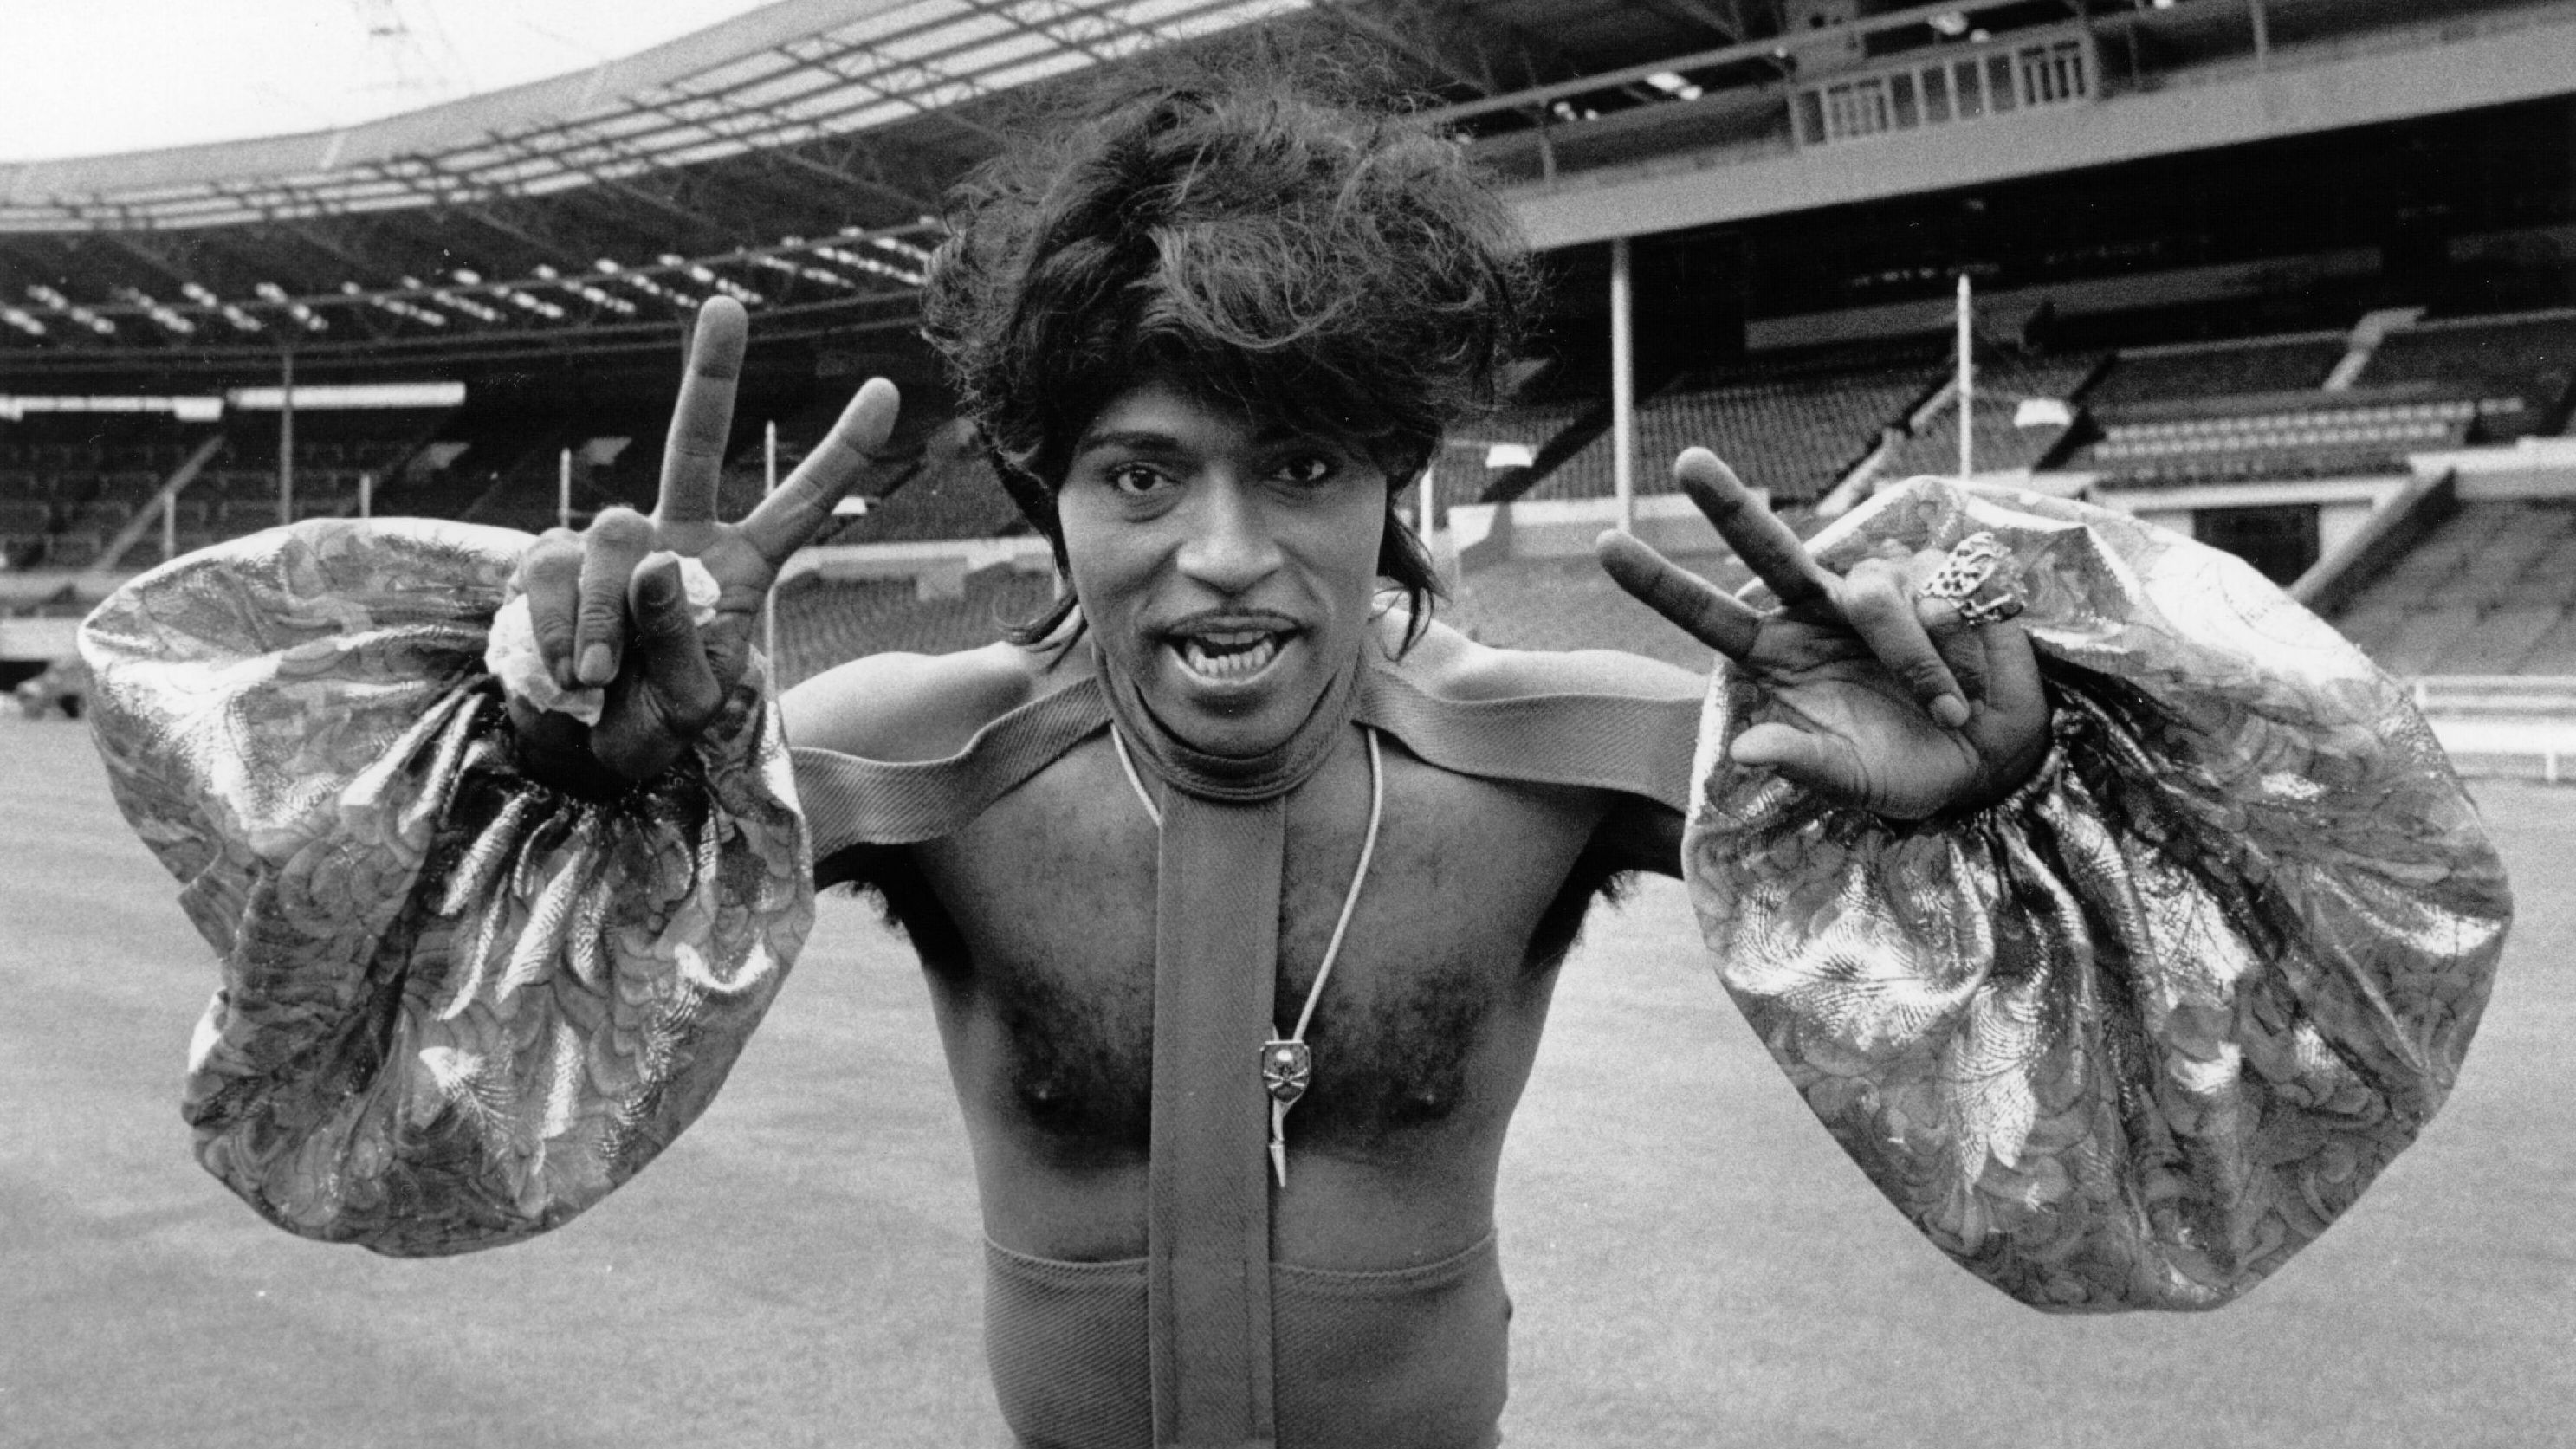 Little Richard poses in costume at an empty Wembley Stadium in London during rehearsals for a concert in 1972.